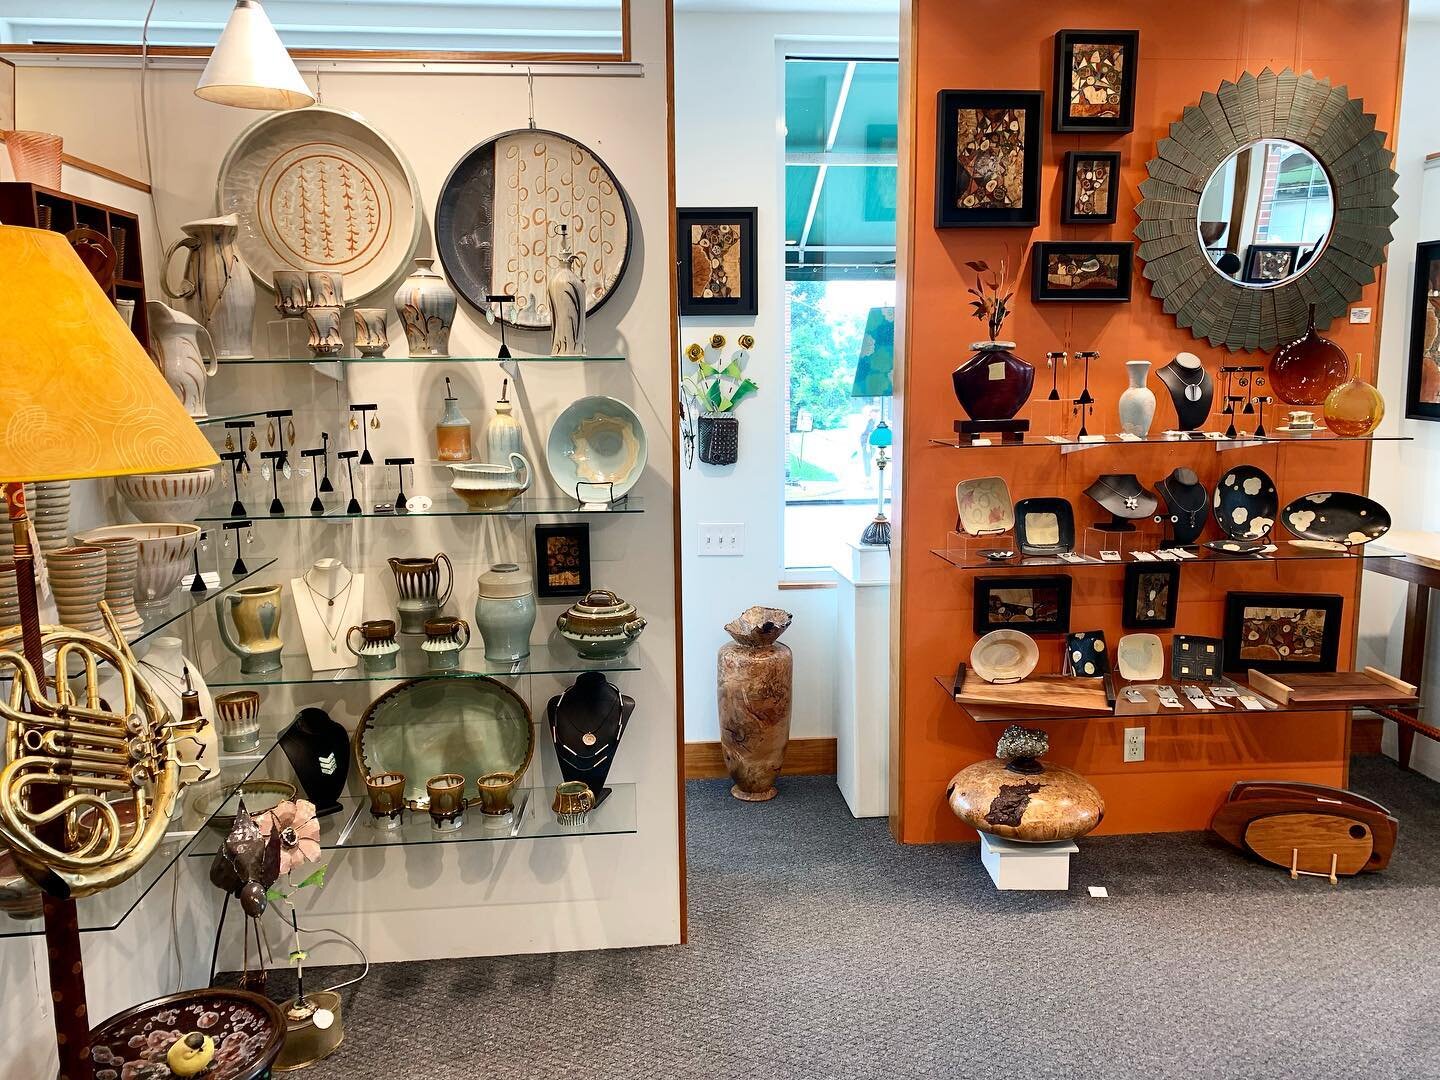 Welcome Floydfesters! On your way up to the Floydfest site, swing by town and see the local businesses! We&rsquo;re so grateful to represent local craftspeople in our shop and we hope you can stop in town and see what Floyd had to offer. 
.
.
.
#floy